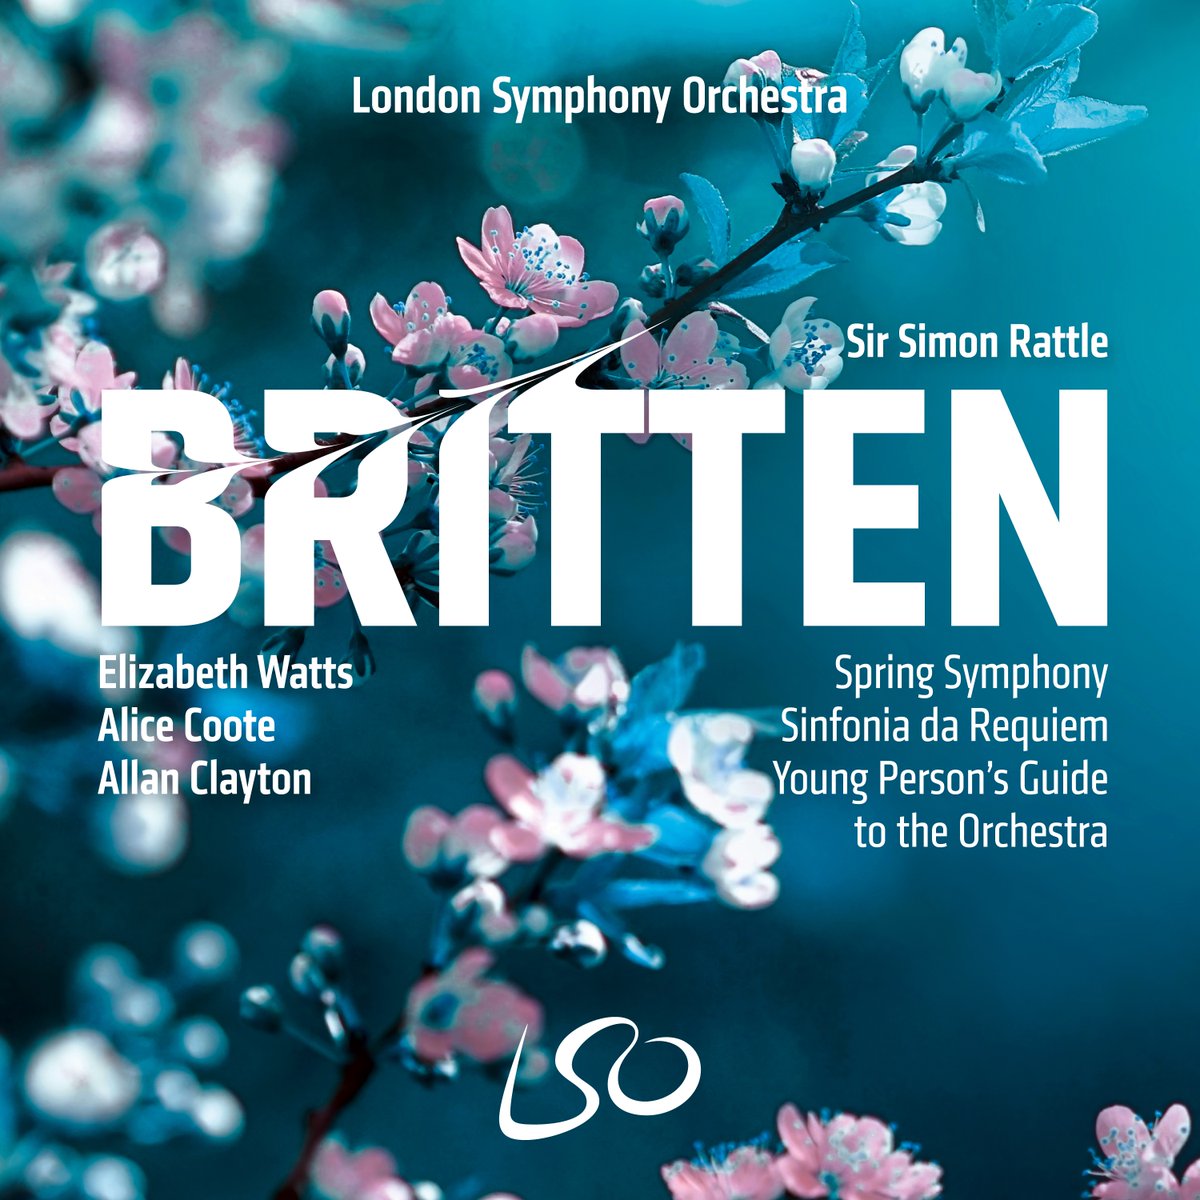 🌸 A symphony for the season 🌸 

Get to know Britten's Spring Symphony, alongside his powerful SInfonia da Requiem and the Young Person's Guide to the Orchestra. apple.co/Britten

Conducted by @SirSimonRattle, and with star singers Elizabeth Watts (@LizWattsSoprano),…